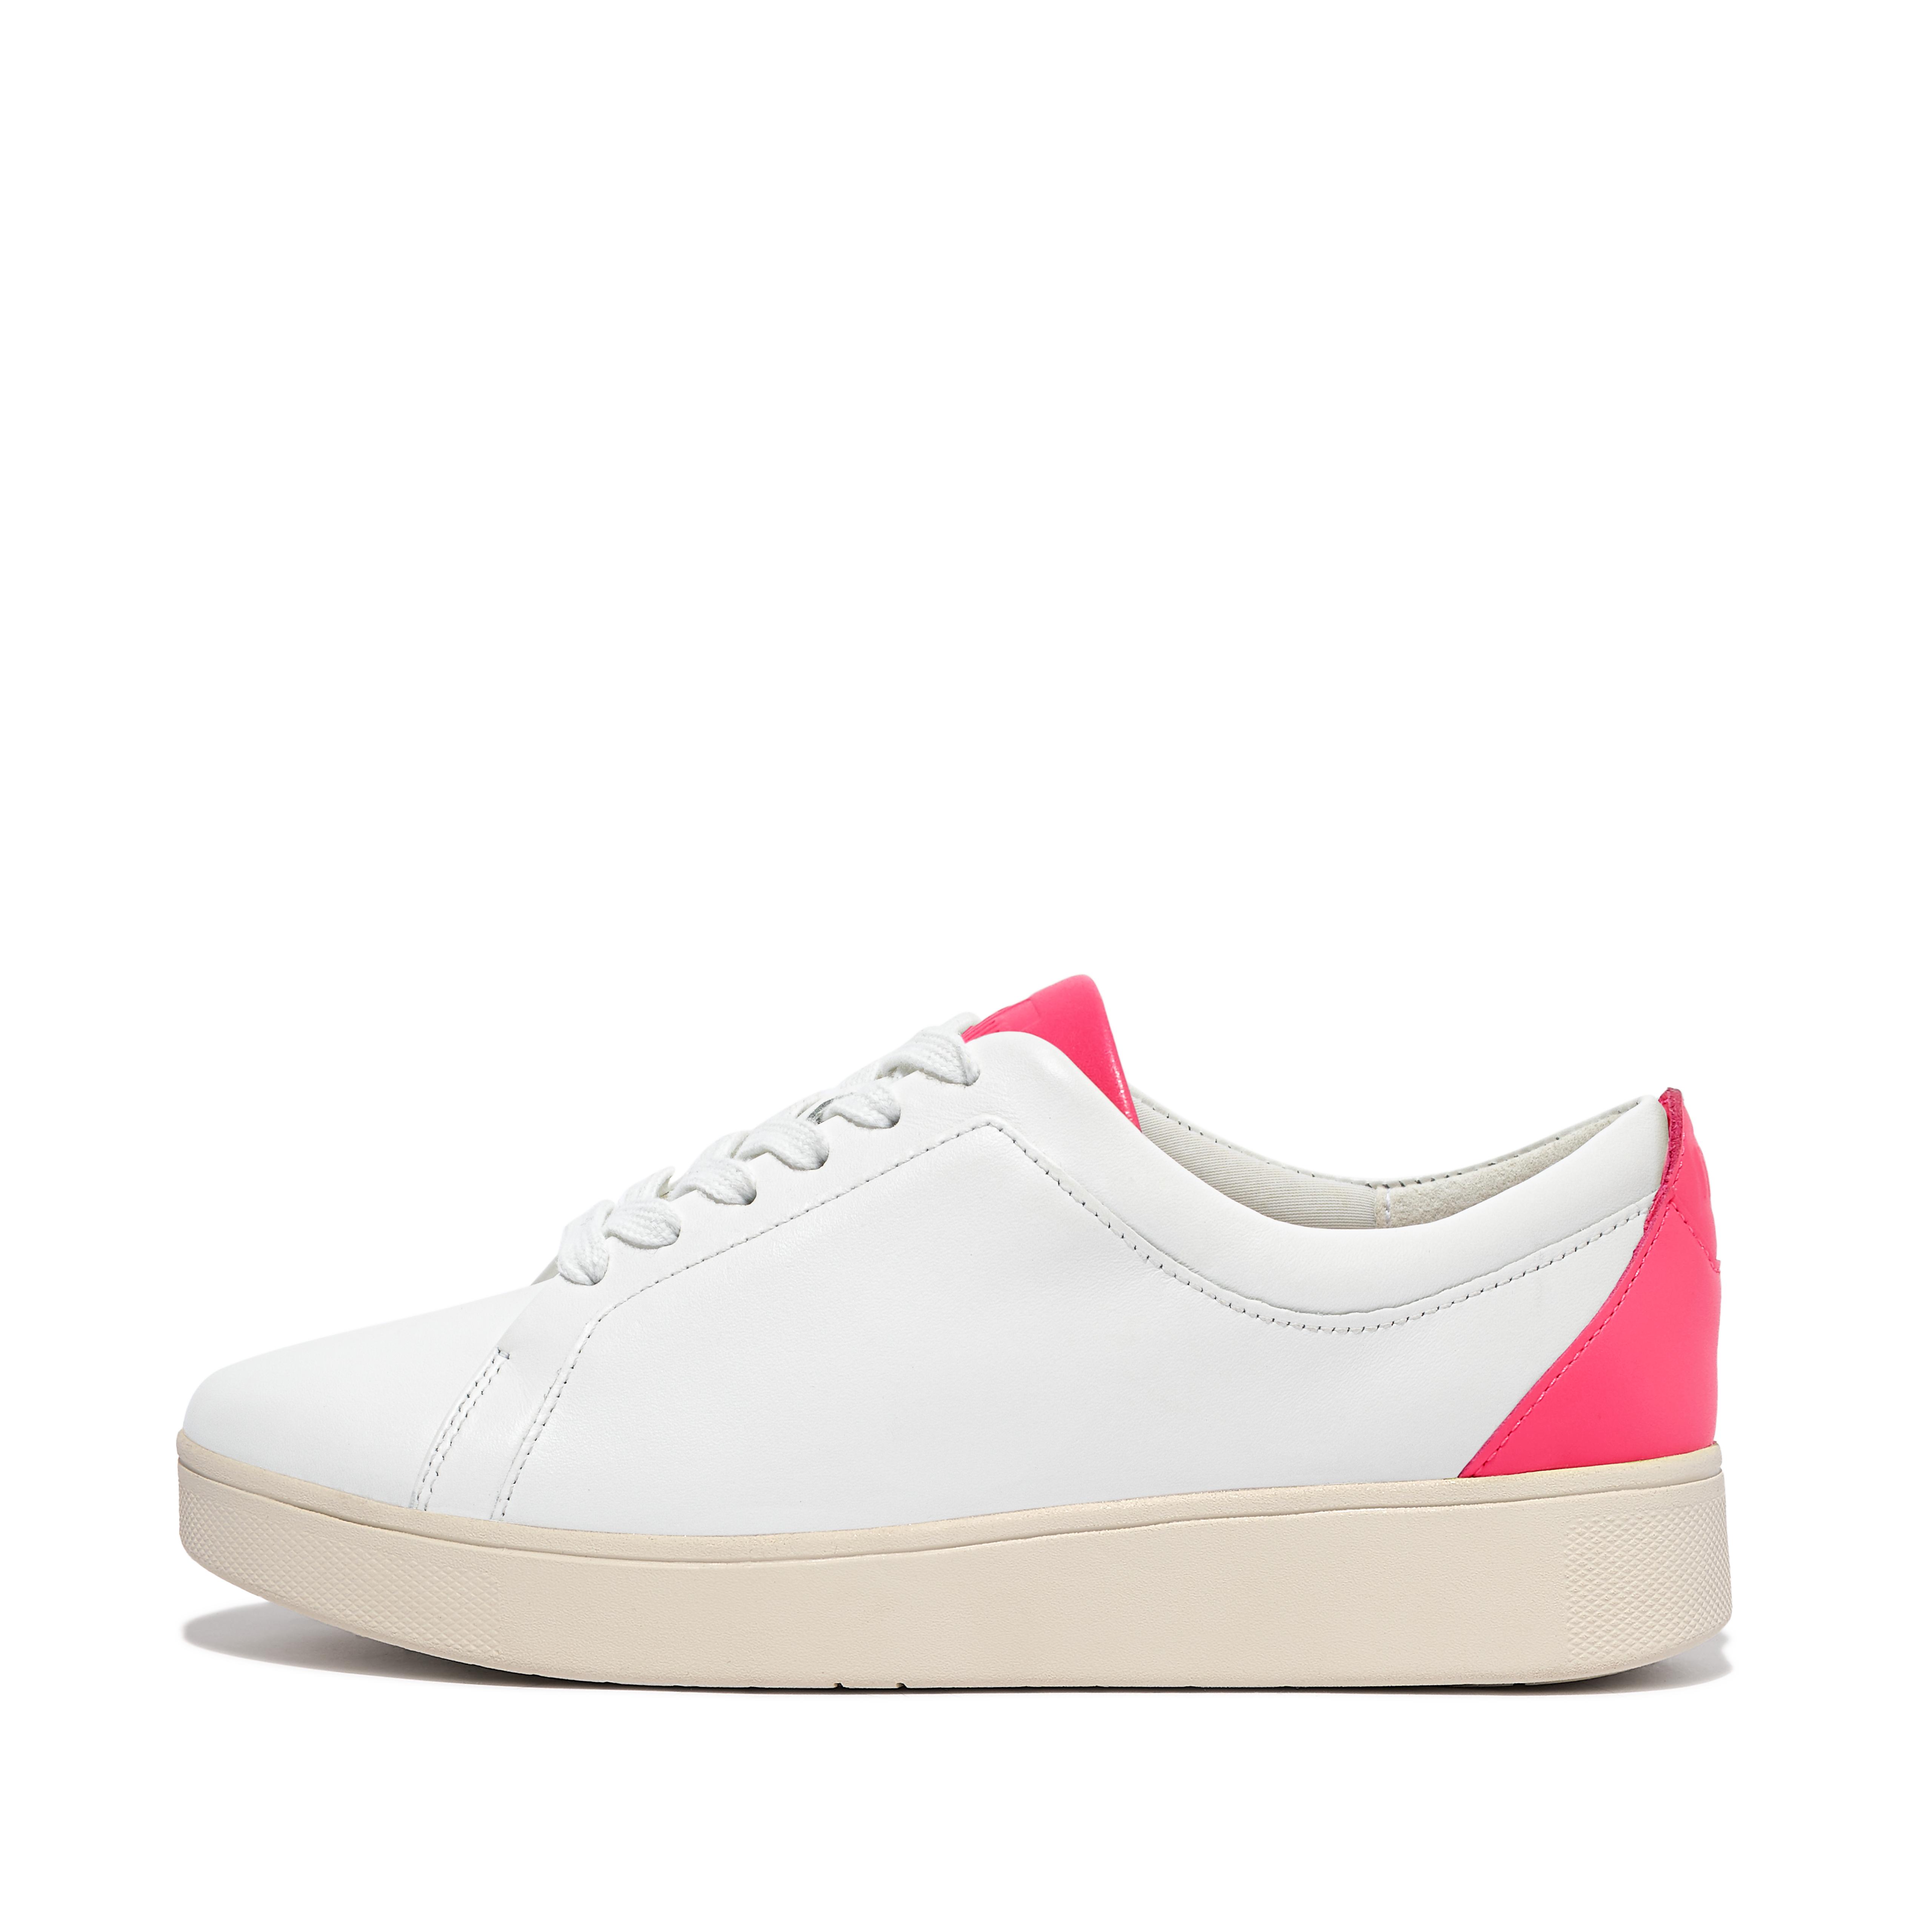 Fitflop Neon-Pop Leather Sneakers